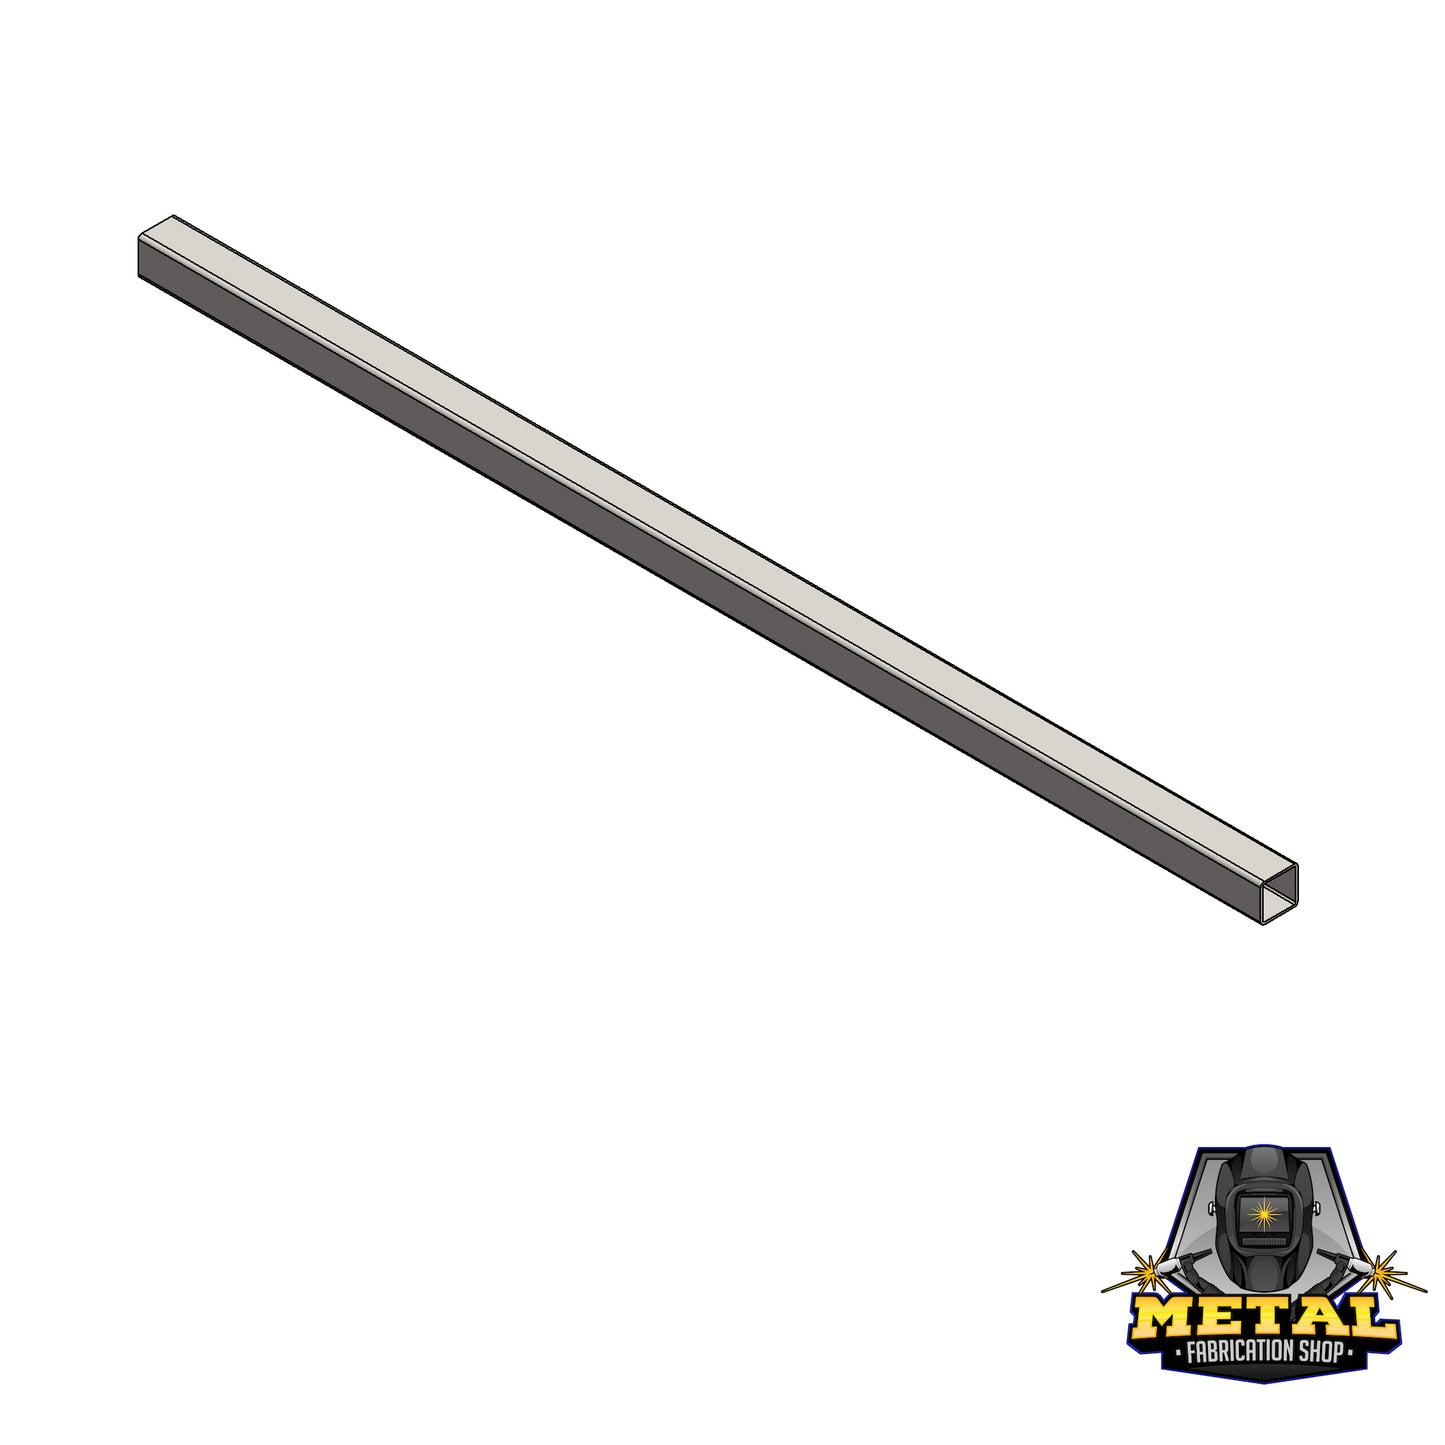 1" OD x 16 Gauge 304 Stainless Steel Square Tube